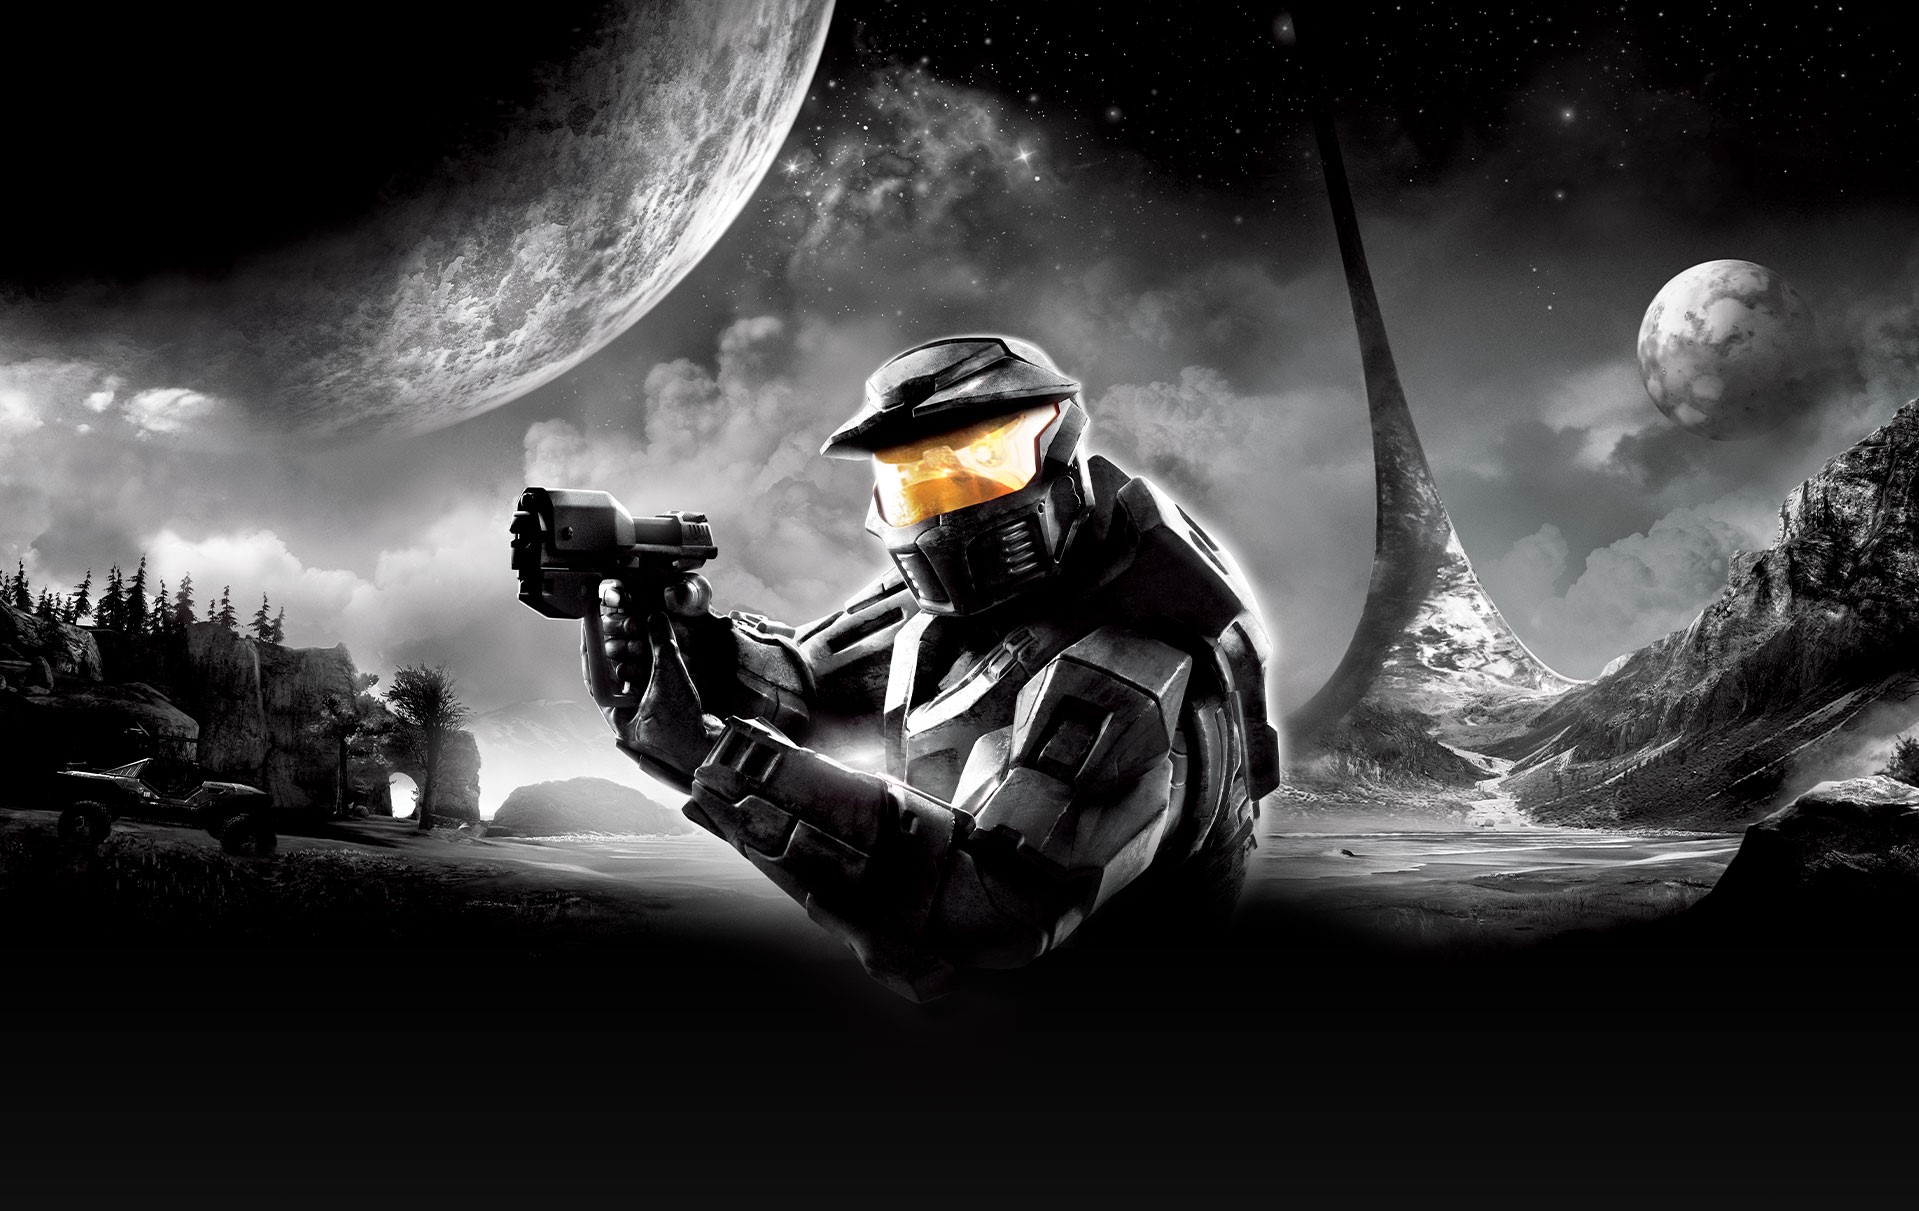 Halo Recruit download the new